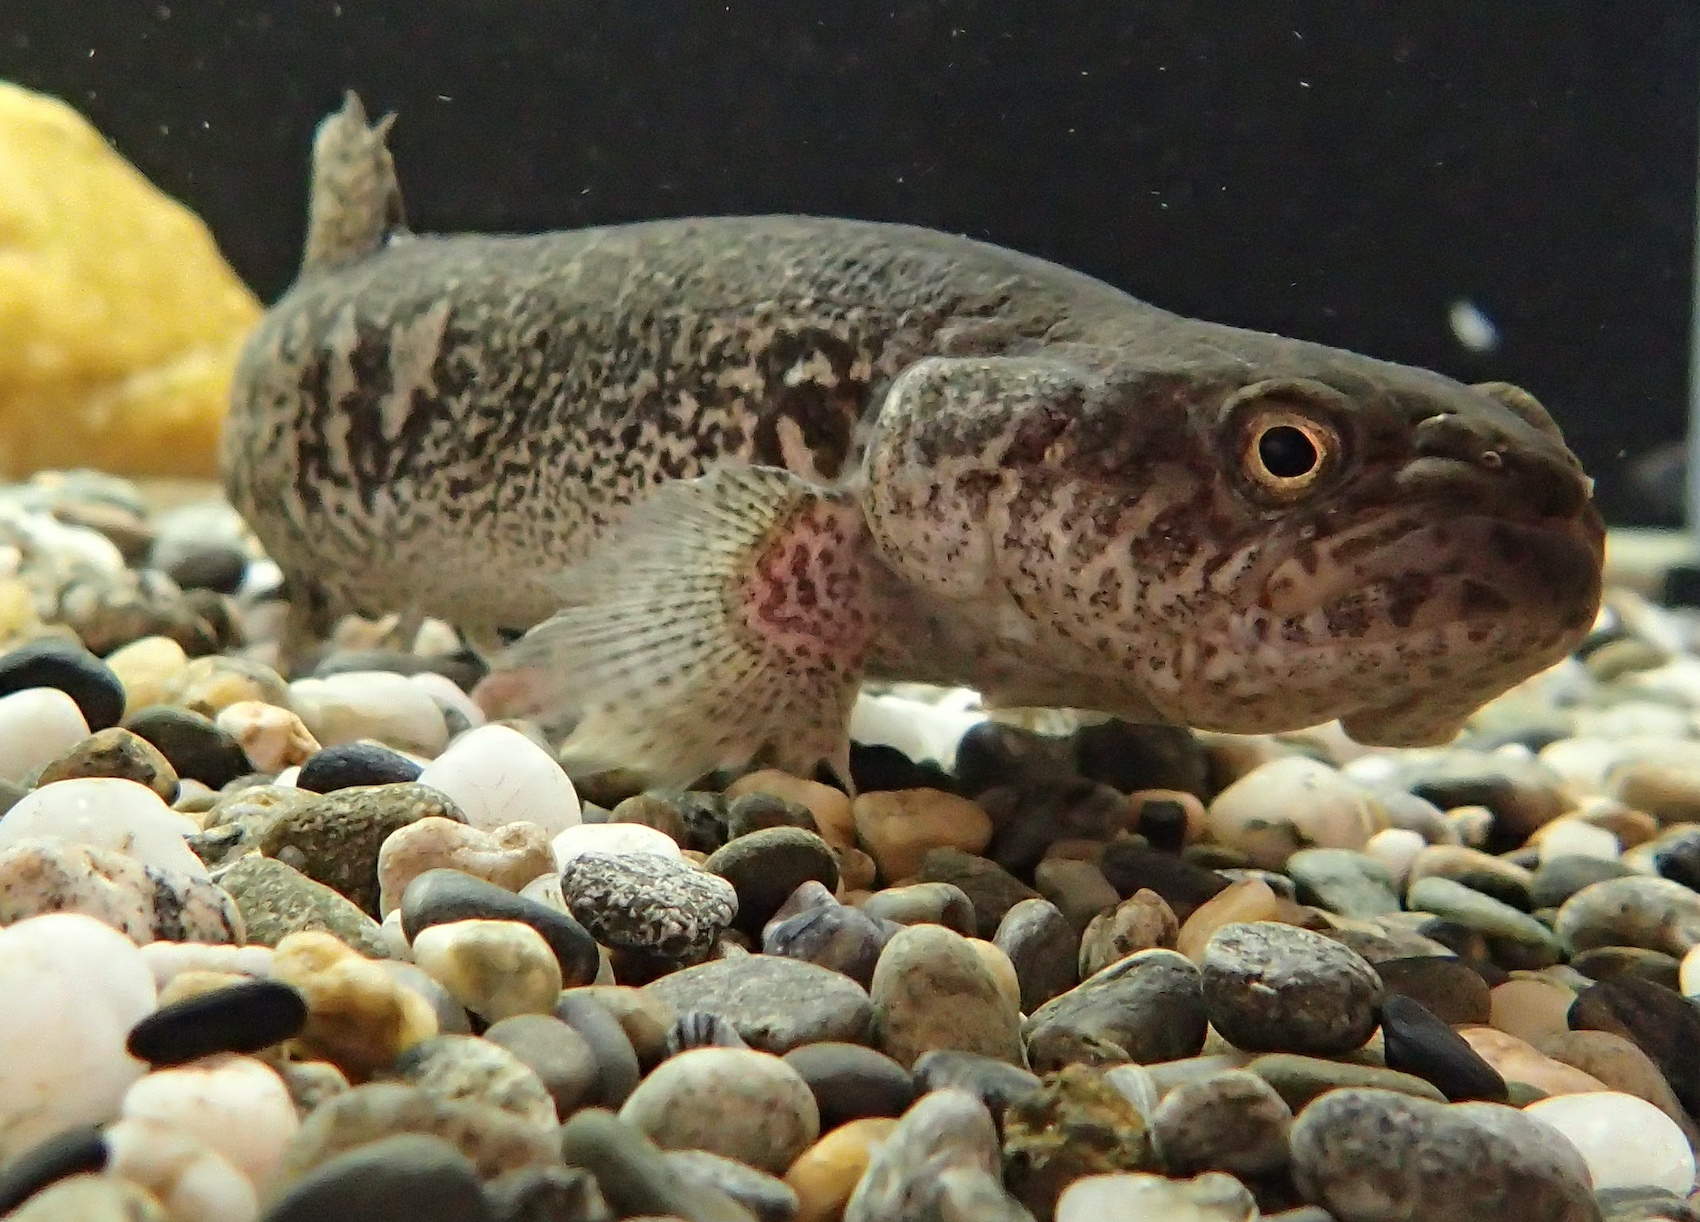 A mottled brown and white fish with large pectoral fins and a blunt nose swims over a bed of gravel.